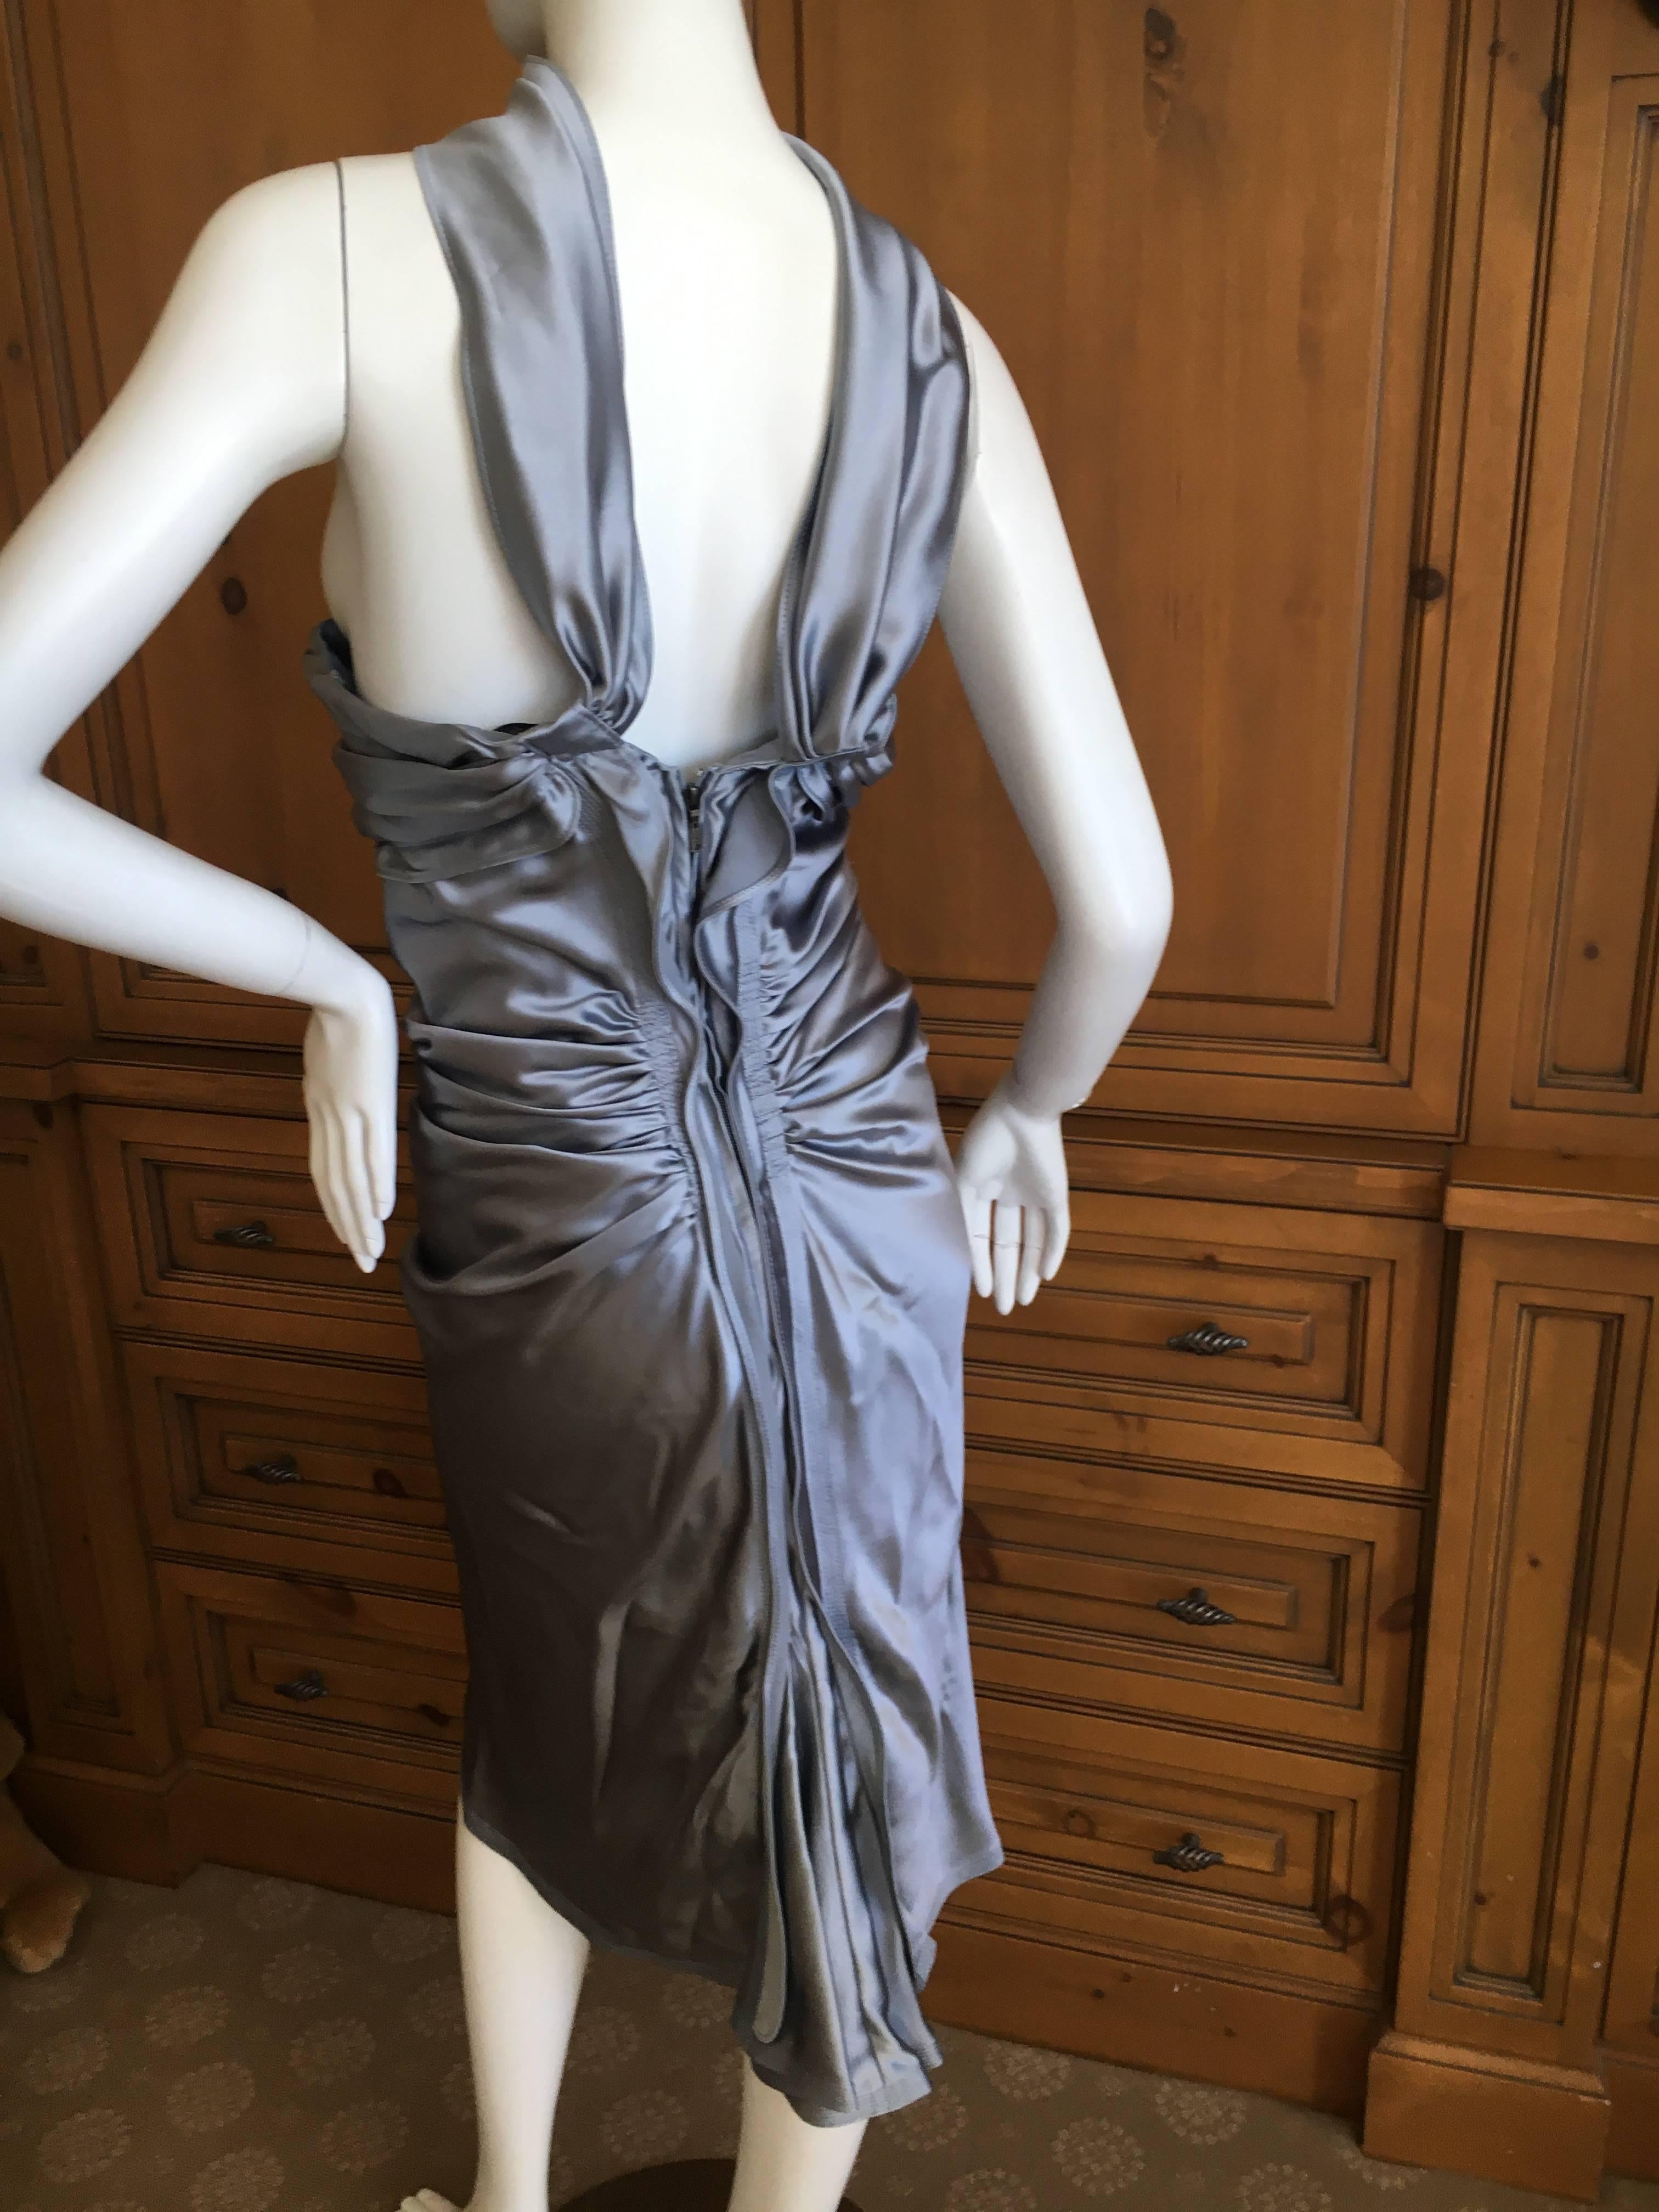 Yves Saint Laurent by Tom Ford Shimmery Silver Silk Dress In Excellent Condition For Sale In Cloverdale, CA